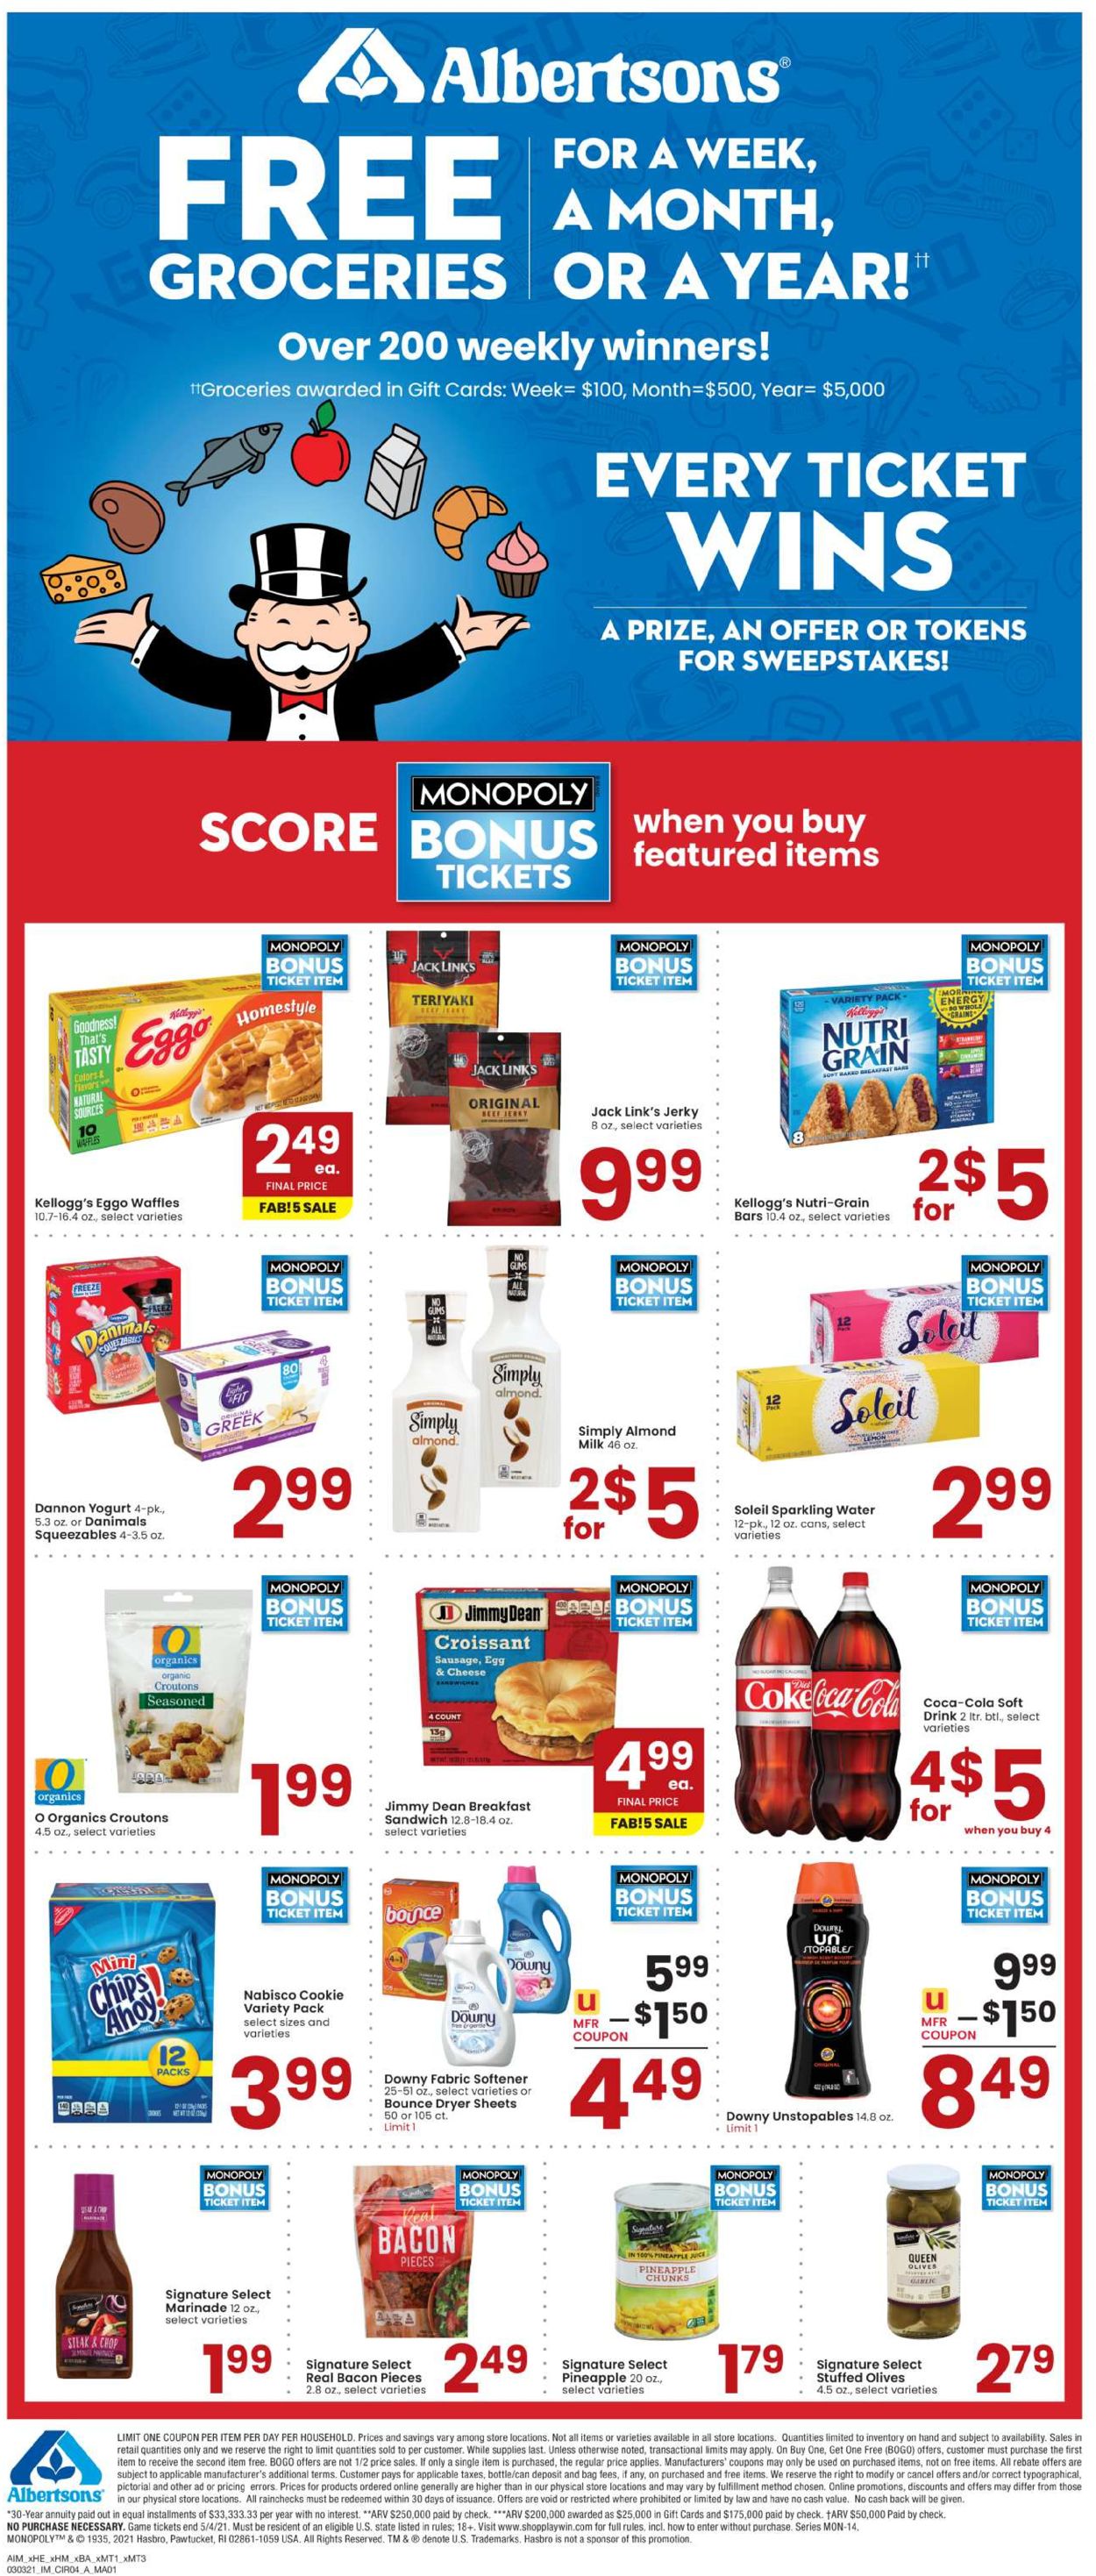 Albertsons Current weekly ad 03/03 - 03/09/2021 [4] - frequent-ads.com